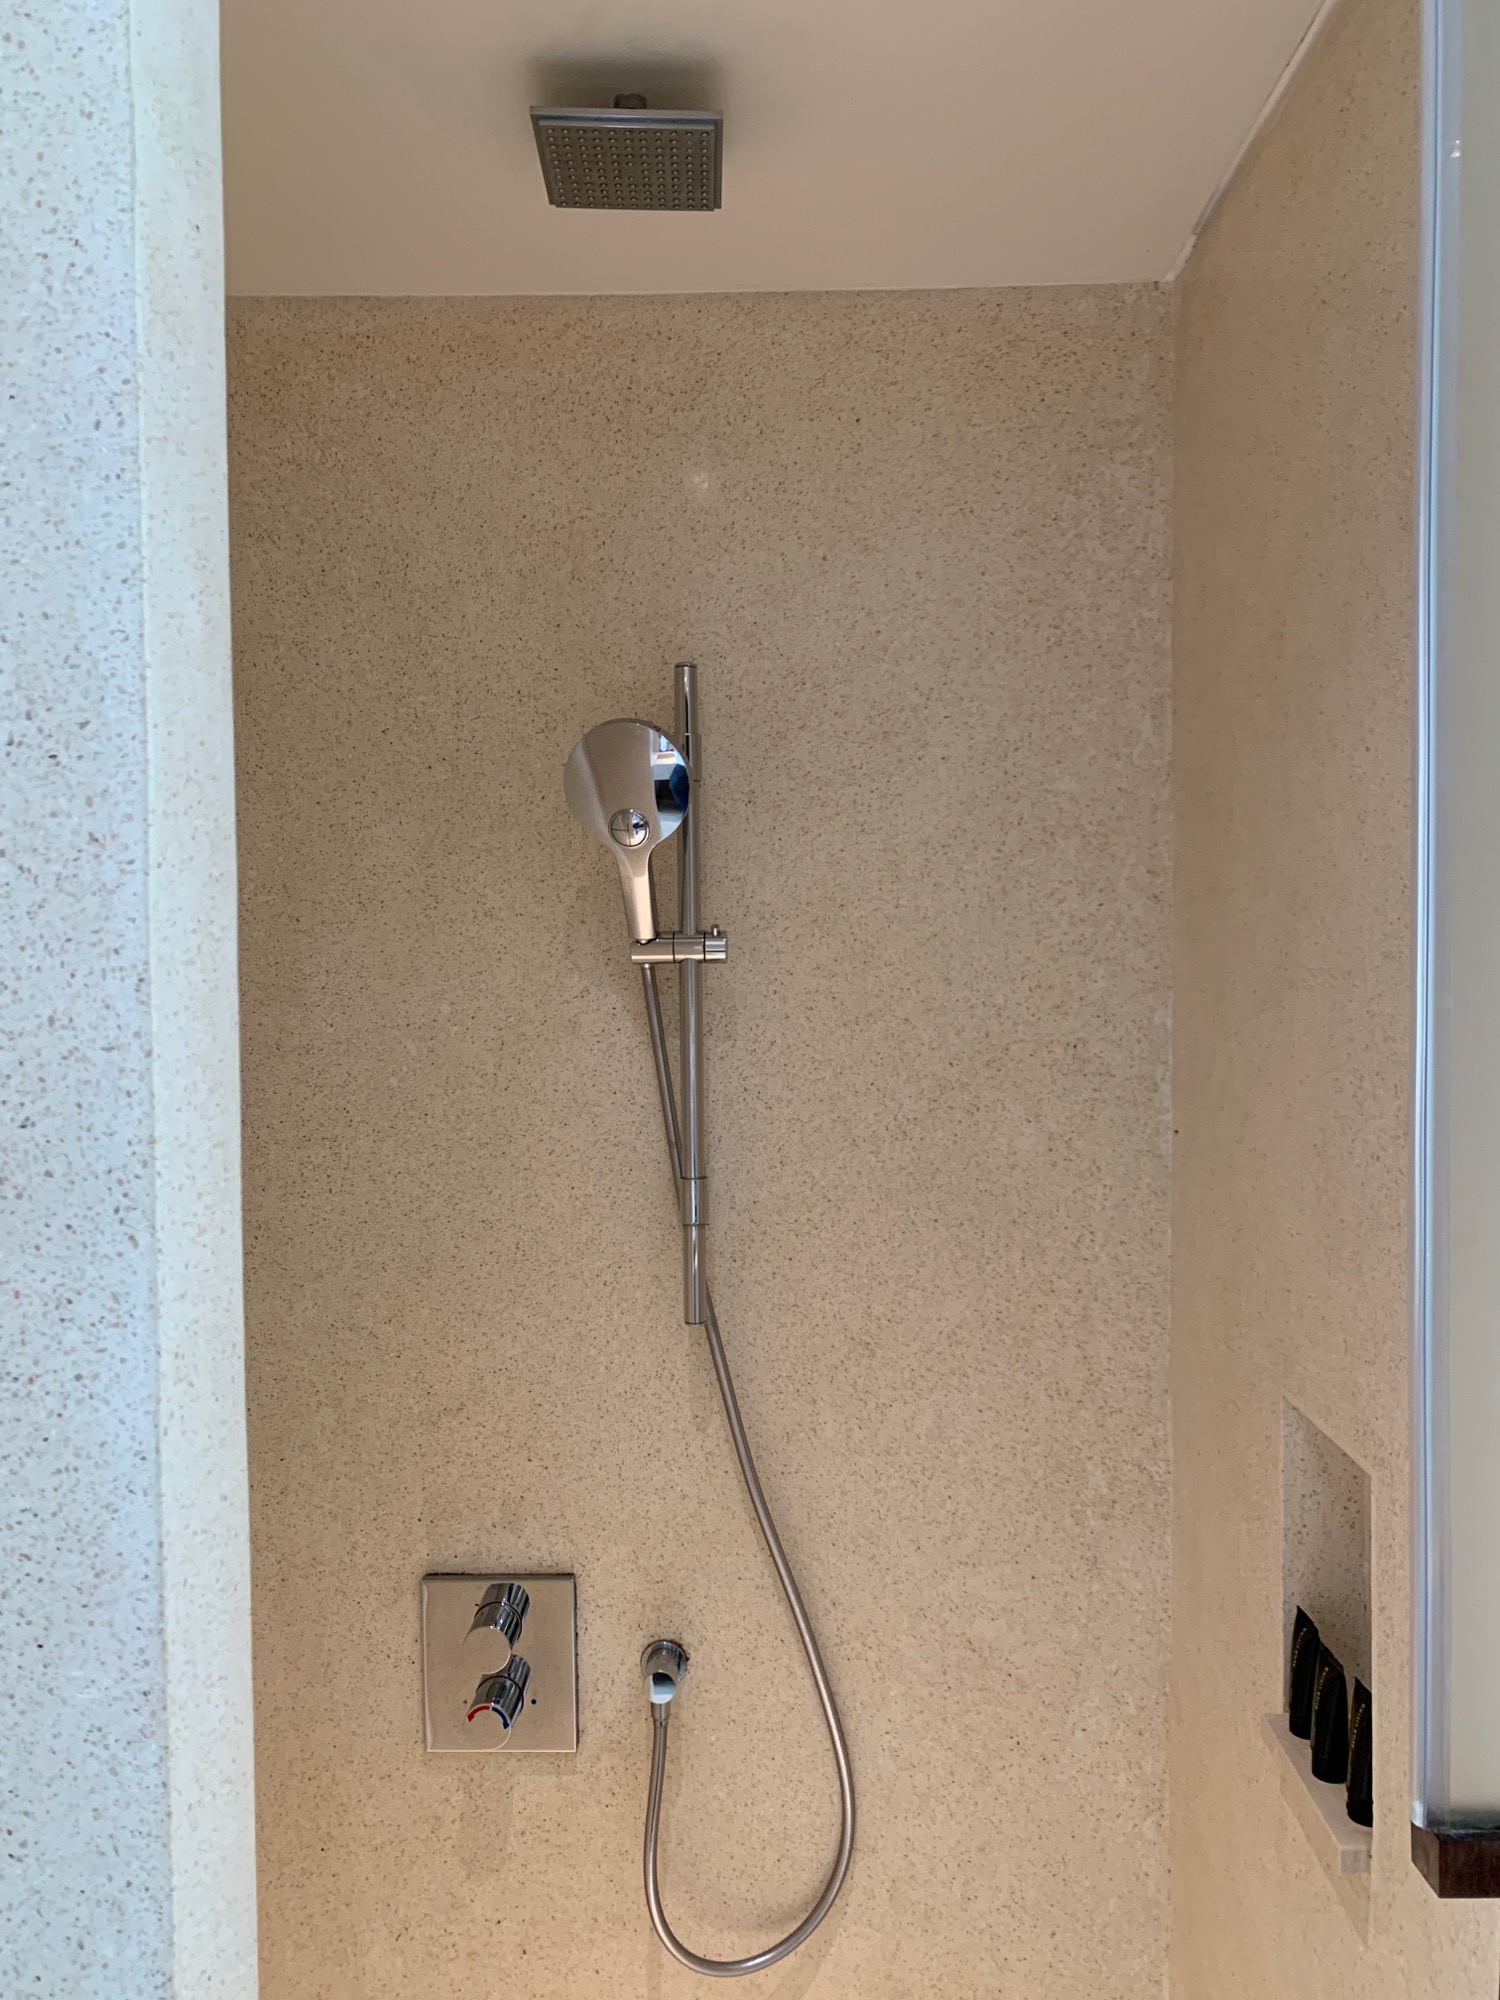 a shower head and hose on a wall